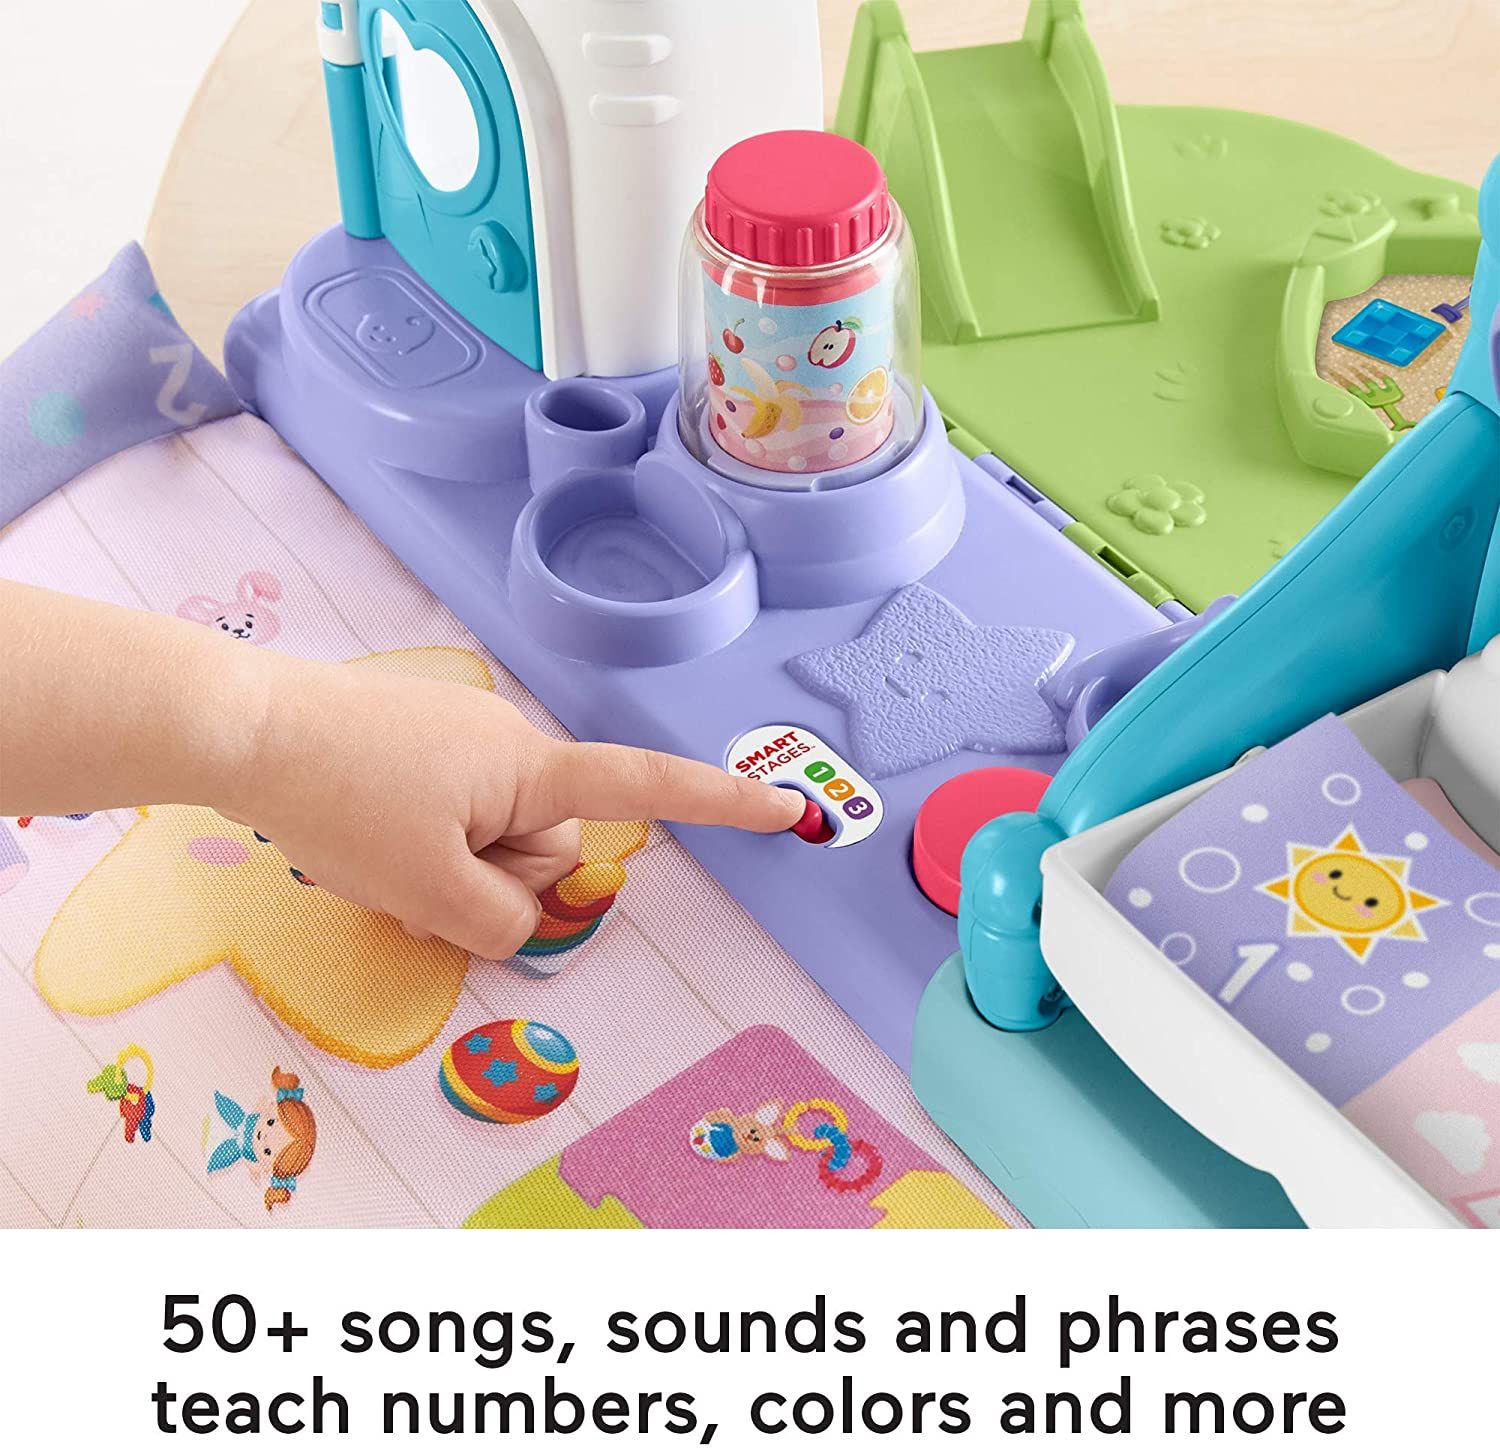  Bộ đồ chơi Fisher-Price Little People 1-2-3 Babies Playdate Musical playset 